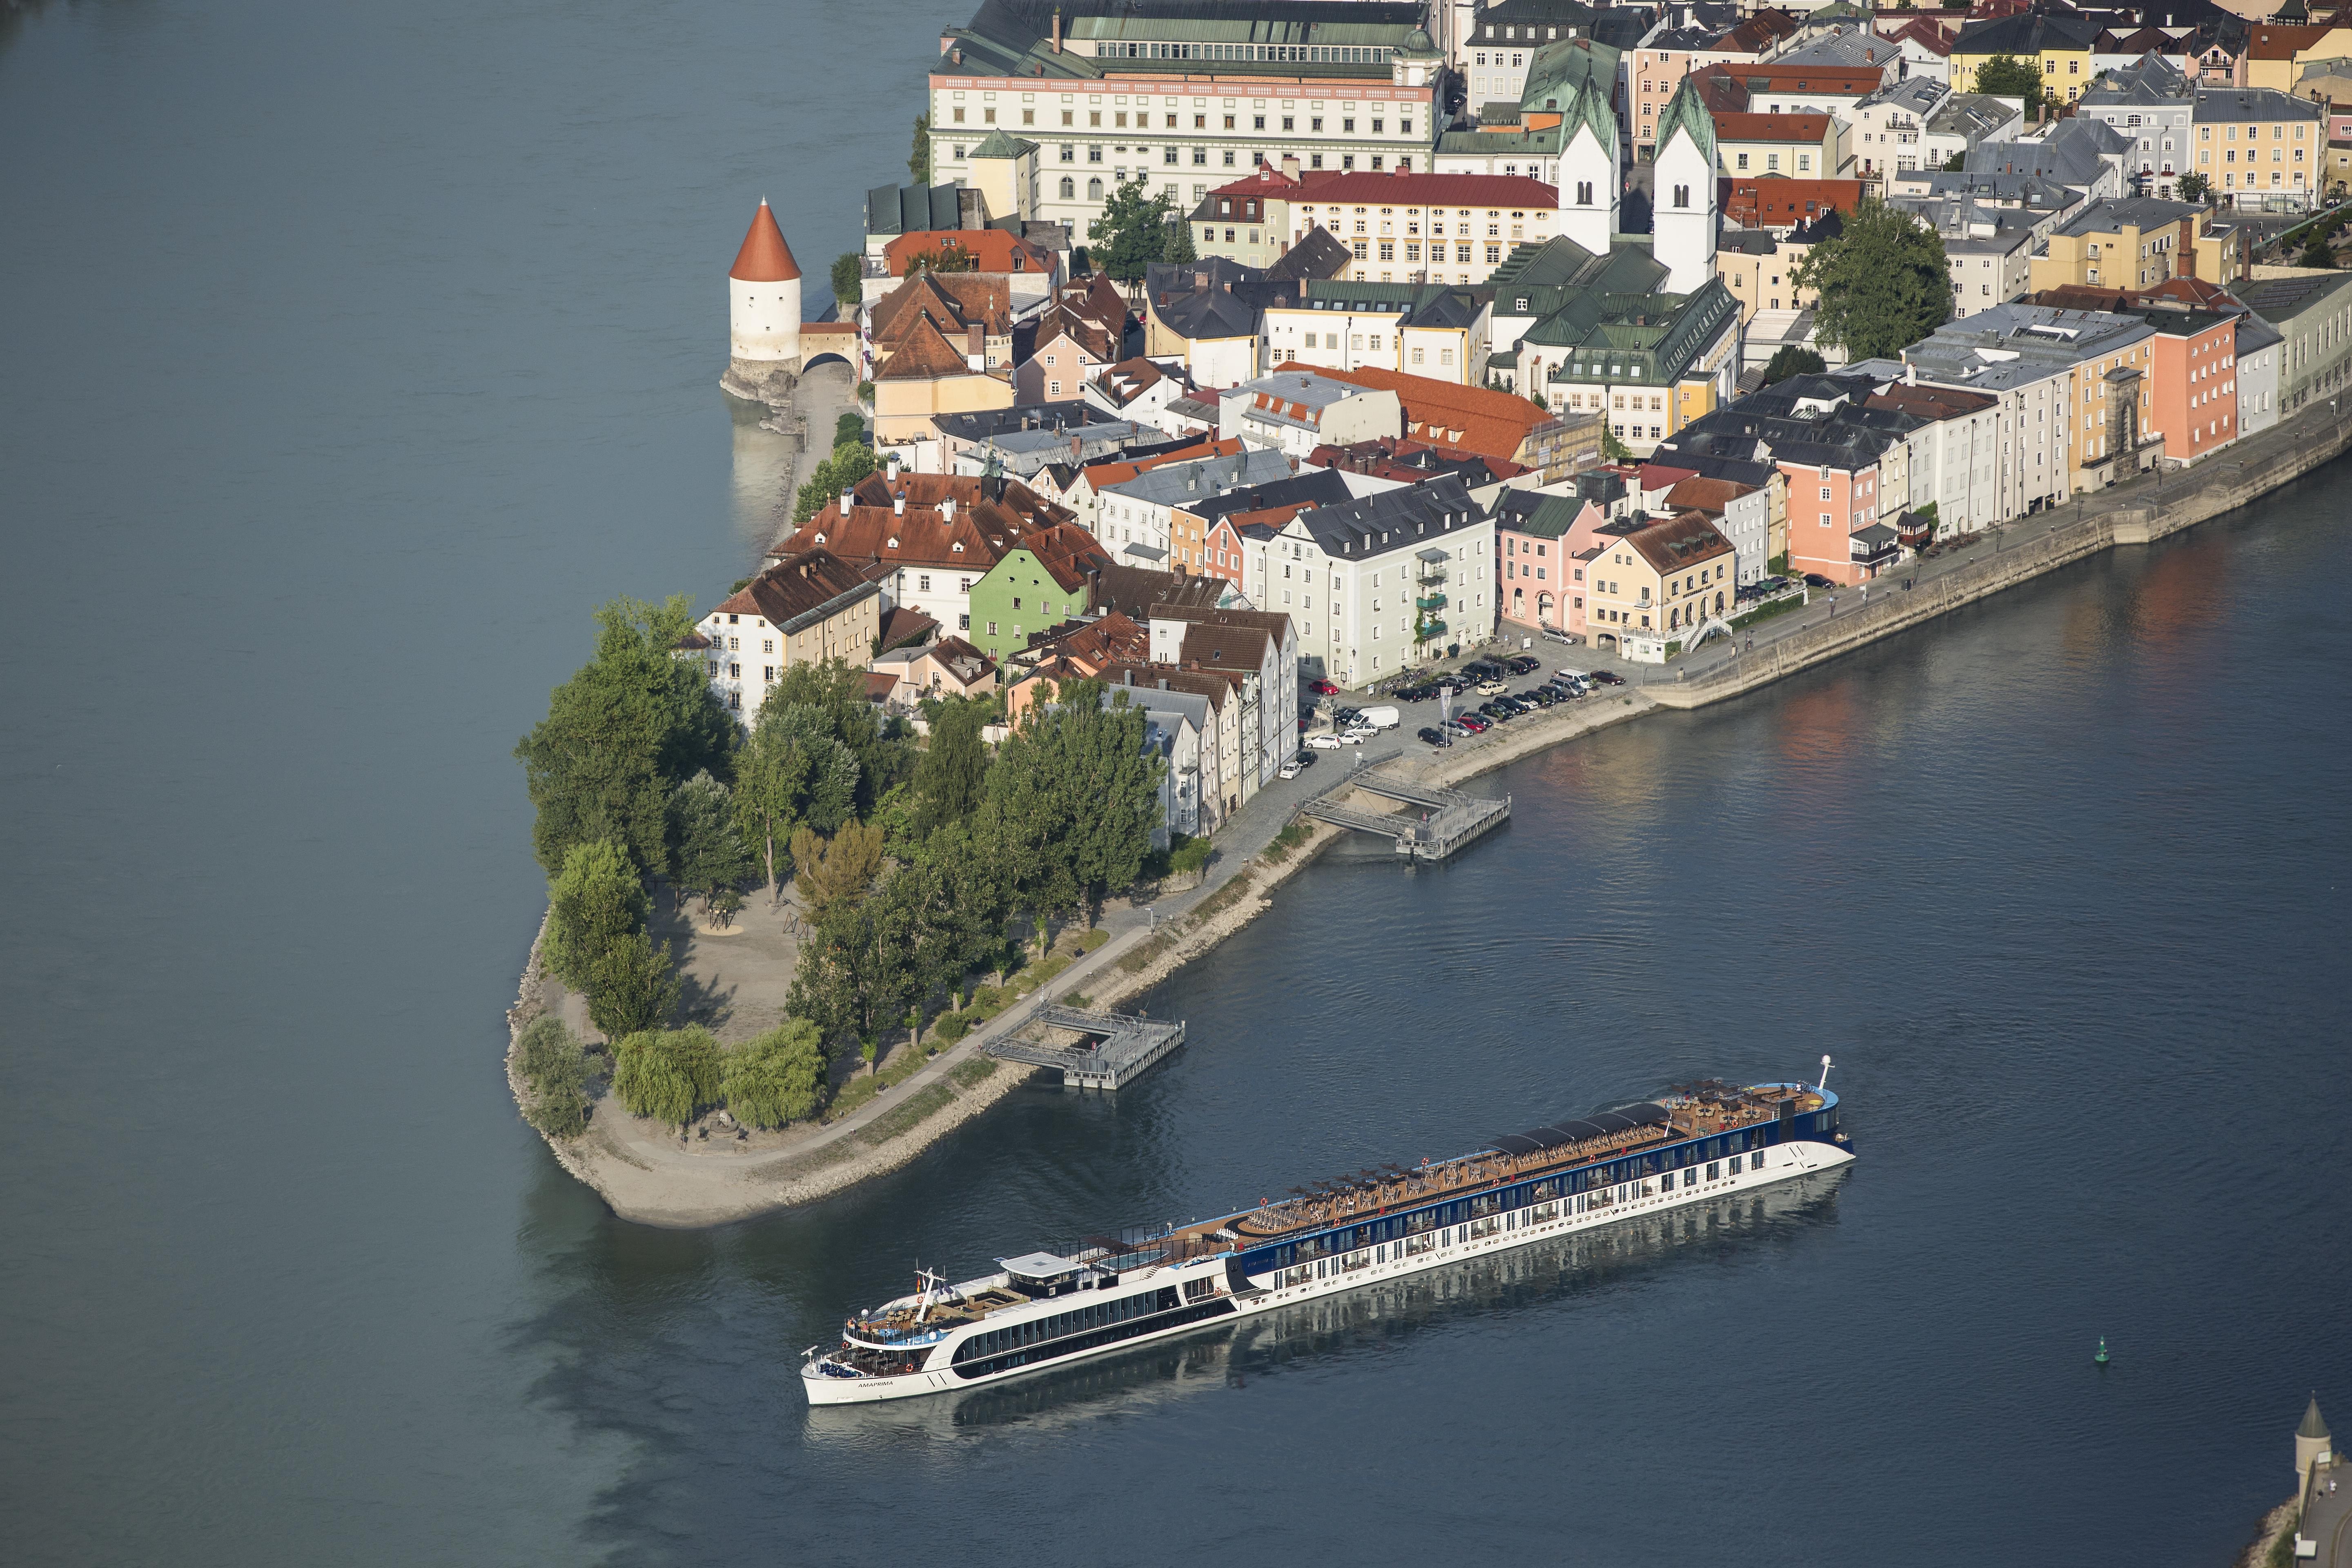 AmaWaterways' ship cruising along Passau of Germany offers a comfortable way to journey into the heart of Europe. 